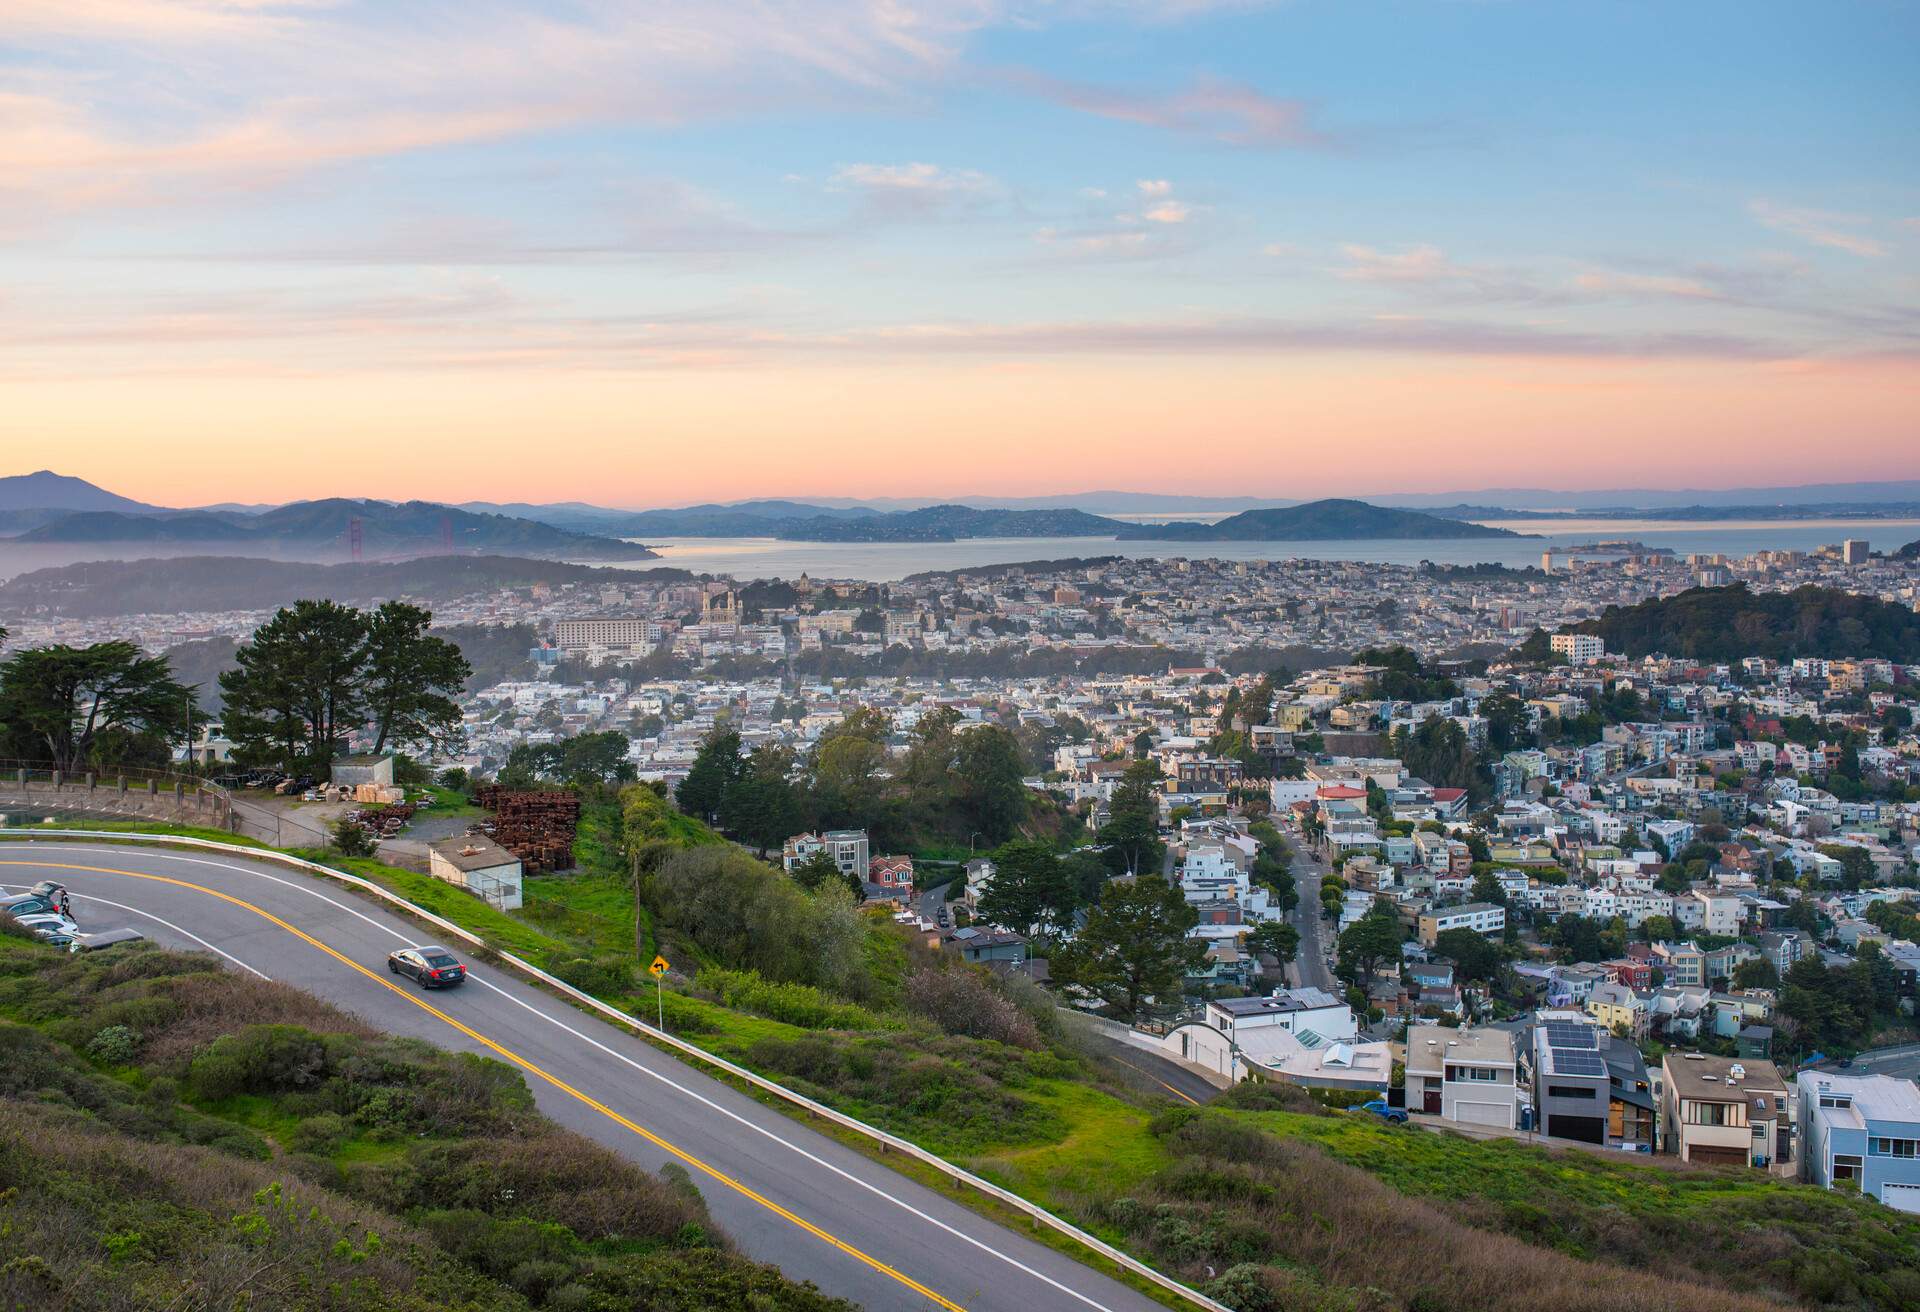 DEST_USA_SAN-FRANCISCO_TWIN-PEAKS_GettyImages-1142418861